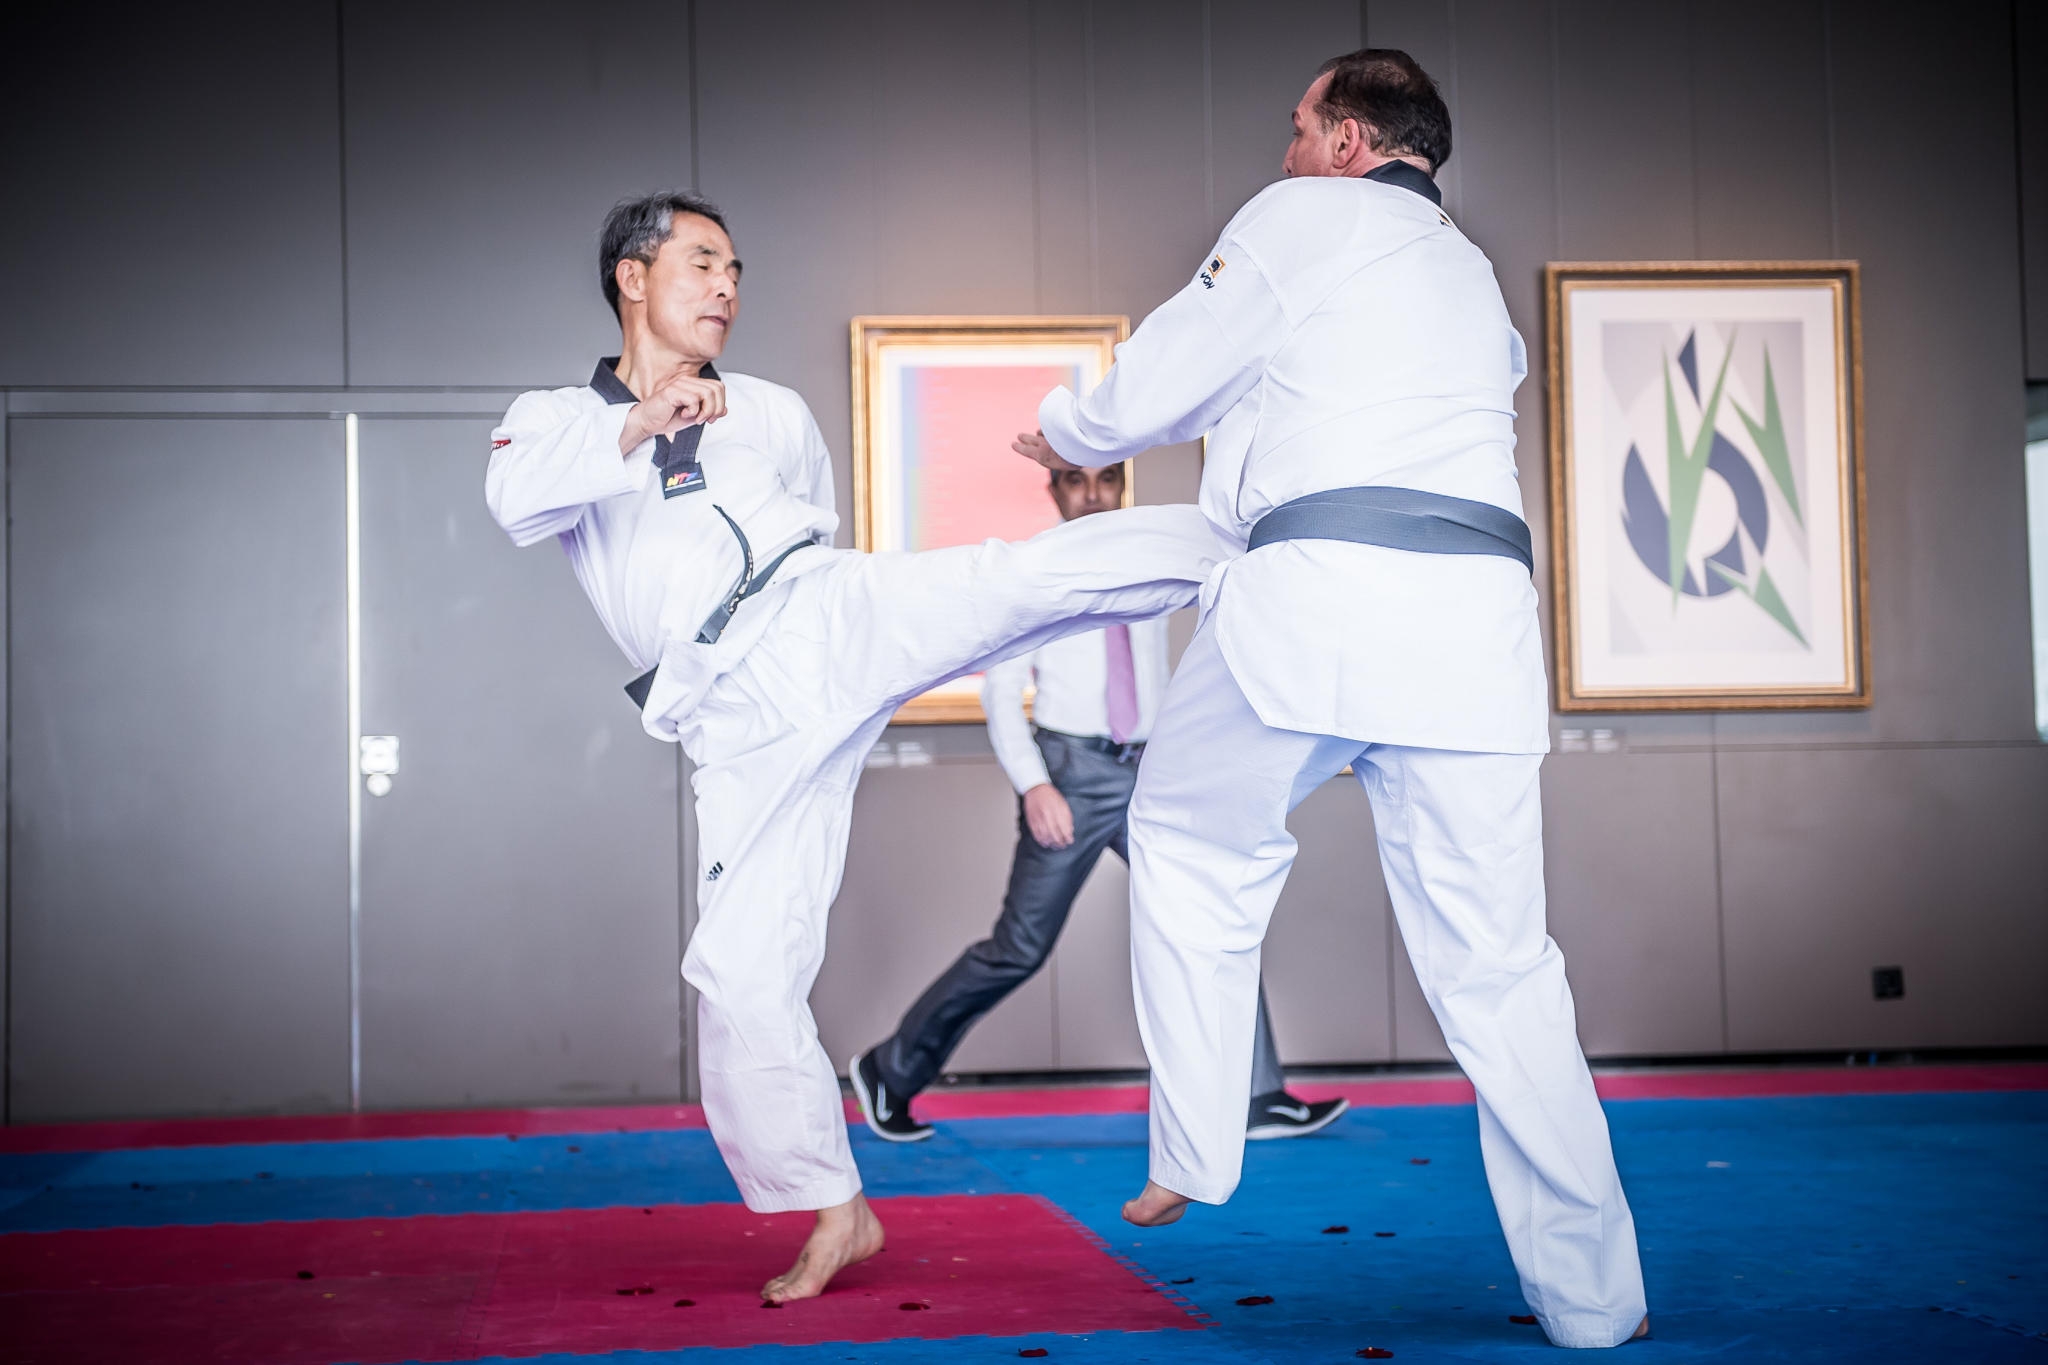 The re-match was held on the sidelines of a joint demonstration from World Taekwondo and the International Taekwondo Federation at the Olympic Museum in Lausanne ©World Taekwondo Europe